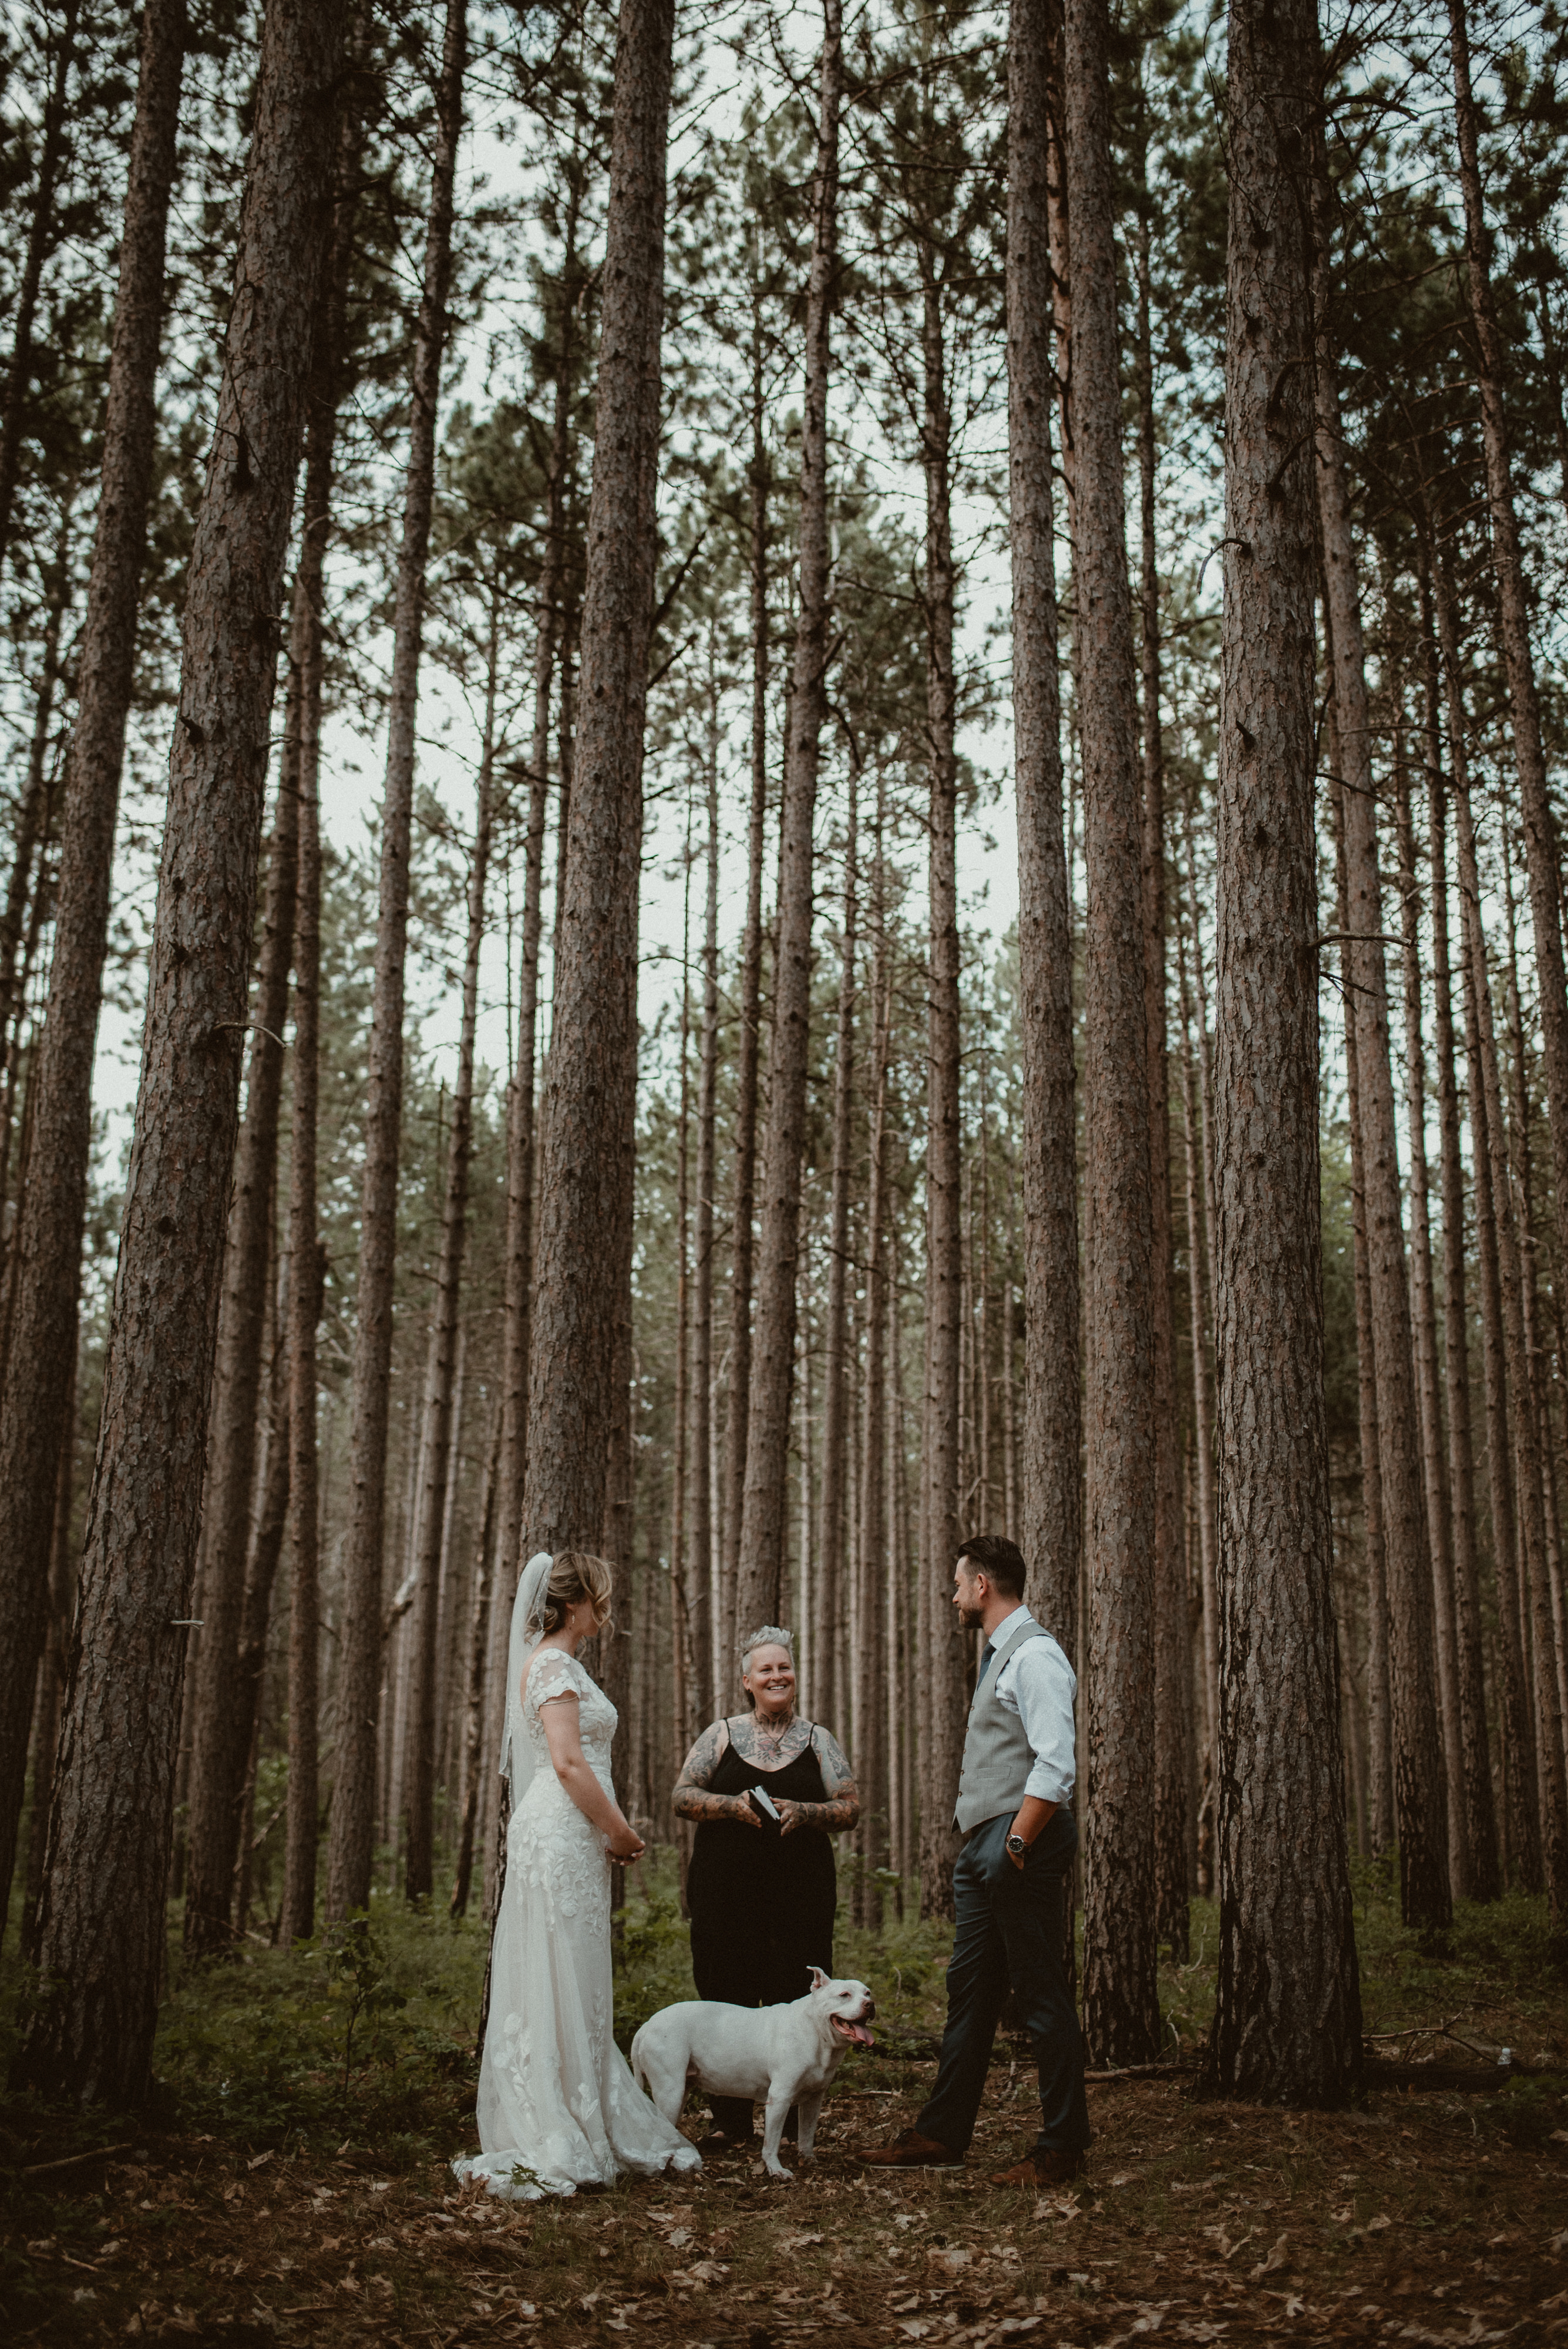 Wedding Ceremony with tall pines as backdrop